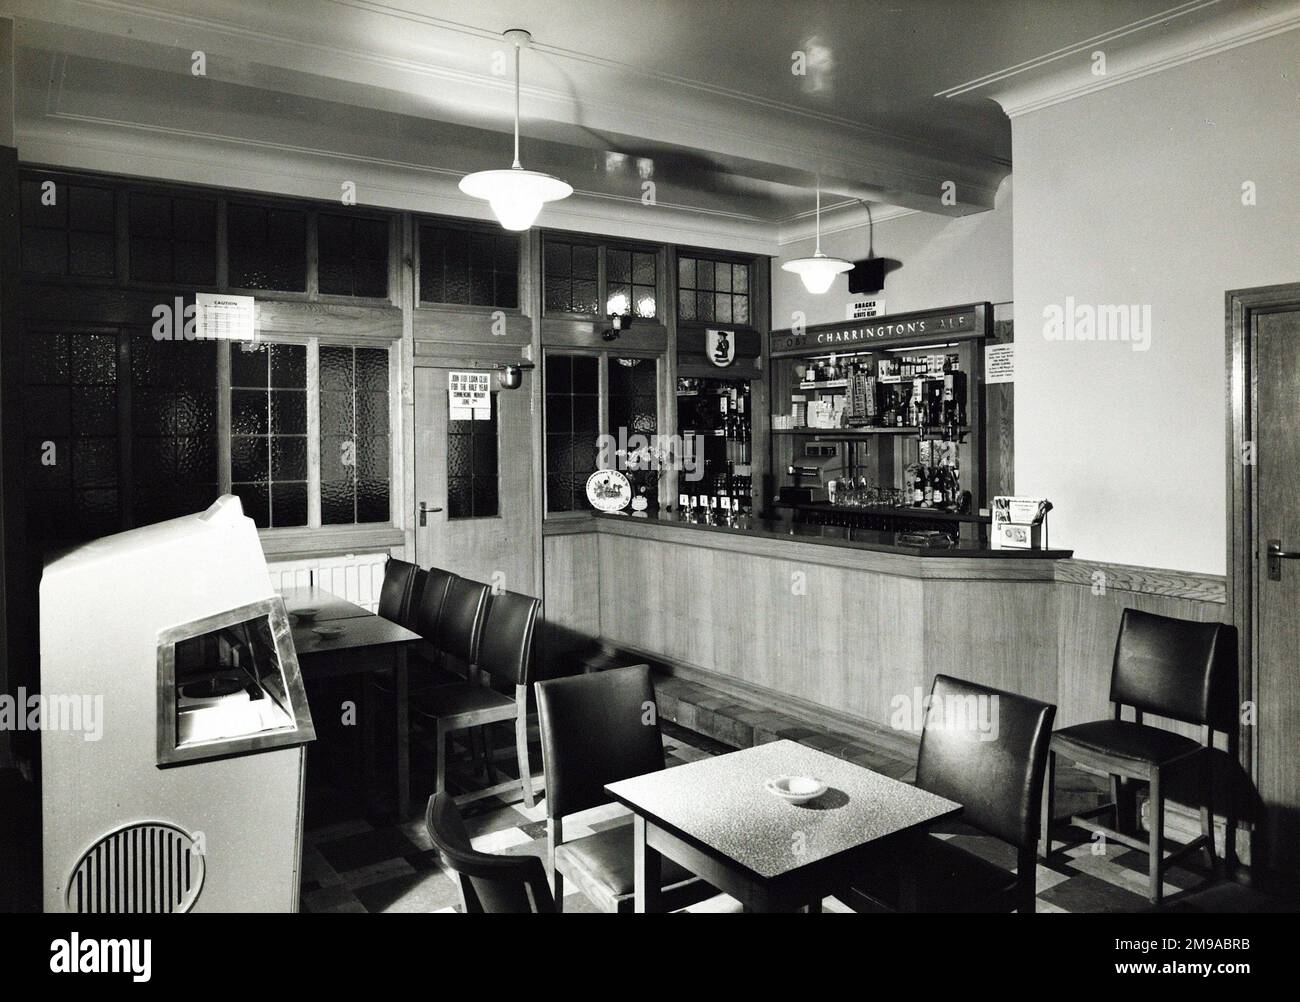 Photograph of Phoenix PH, Edgware, London. The main side of the print (shown here) depicts: Internal bar of the pub.  The back of the print (available on request) details: Nothing for the Phoenix, Edgware, London NW8 8LE. As of July 2018 . Closed and replaced with flats Stock Photo